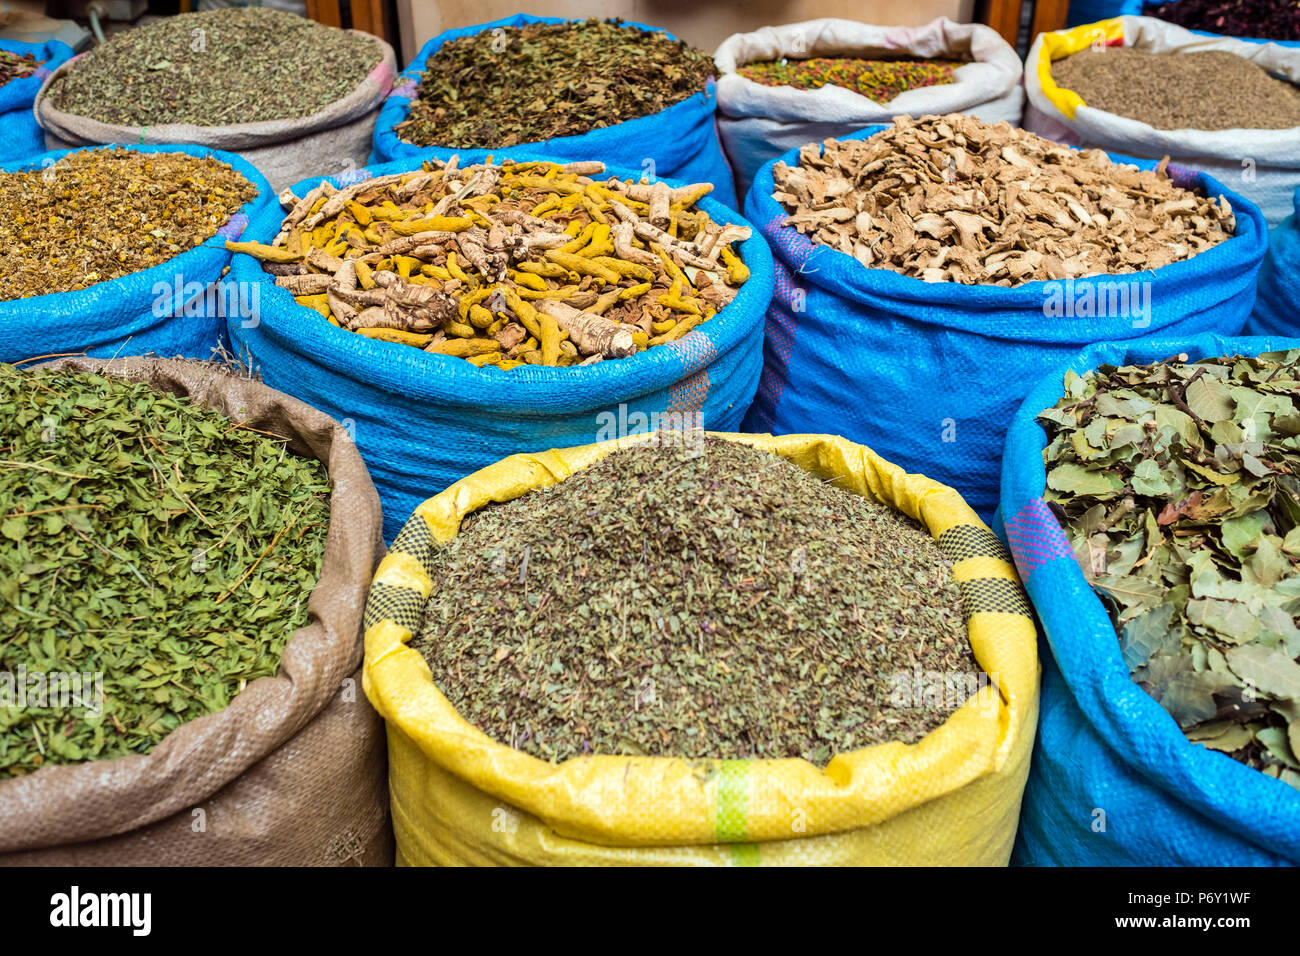 Morocco, Marrakech-Safi (Marrakesh-Tensift-El Haouz) region, Marrakesh. Dried herbs and spices for sale in the Mellah spice market. Stock Photo